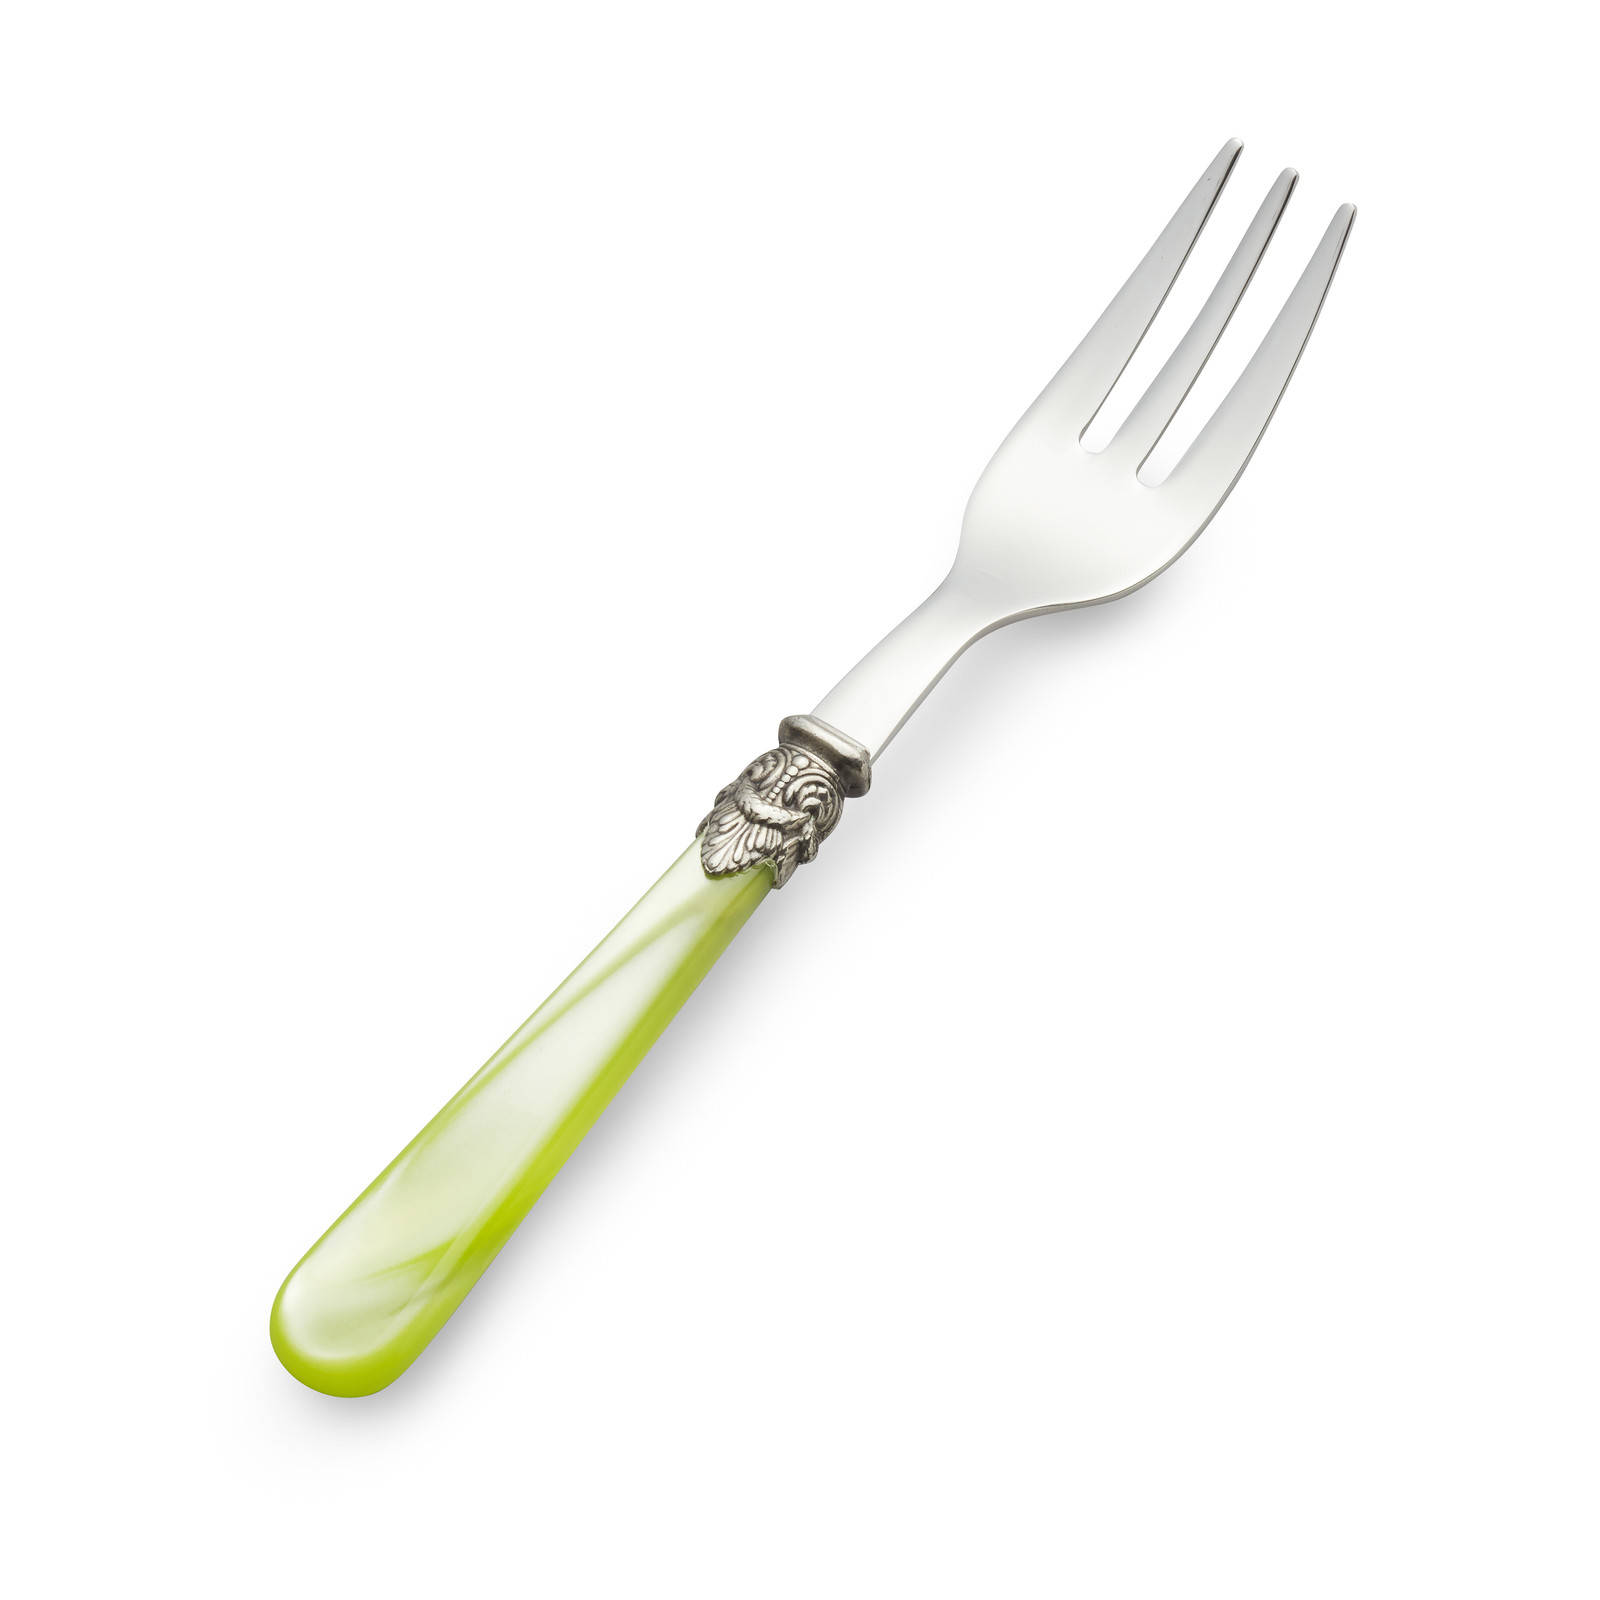 Cake fork / Pastry Fork, Light Green with Mother of Pearl